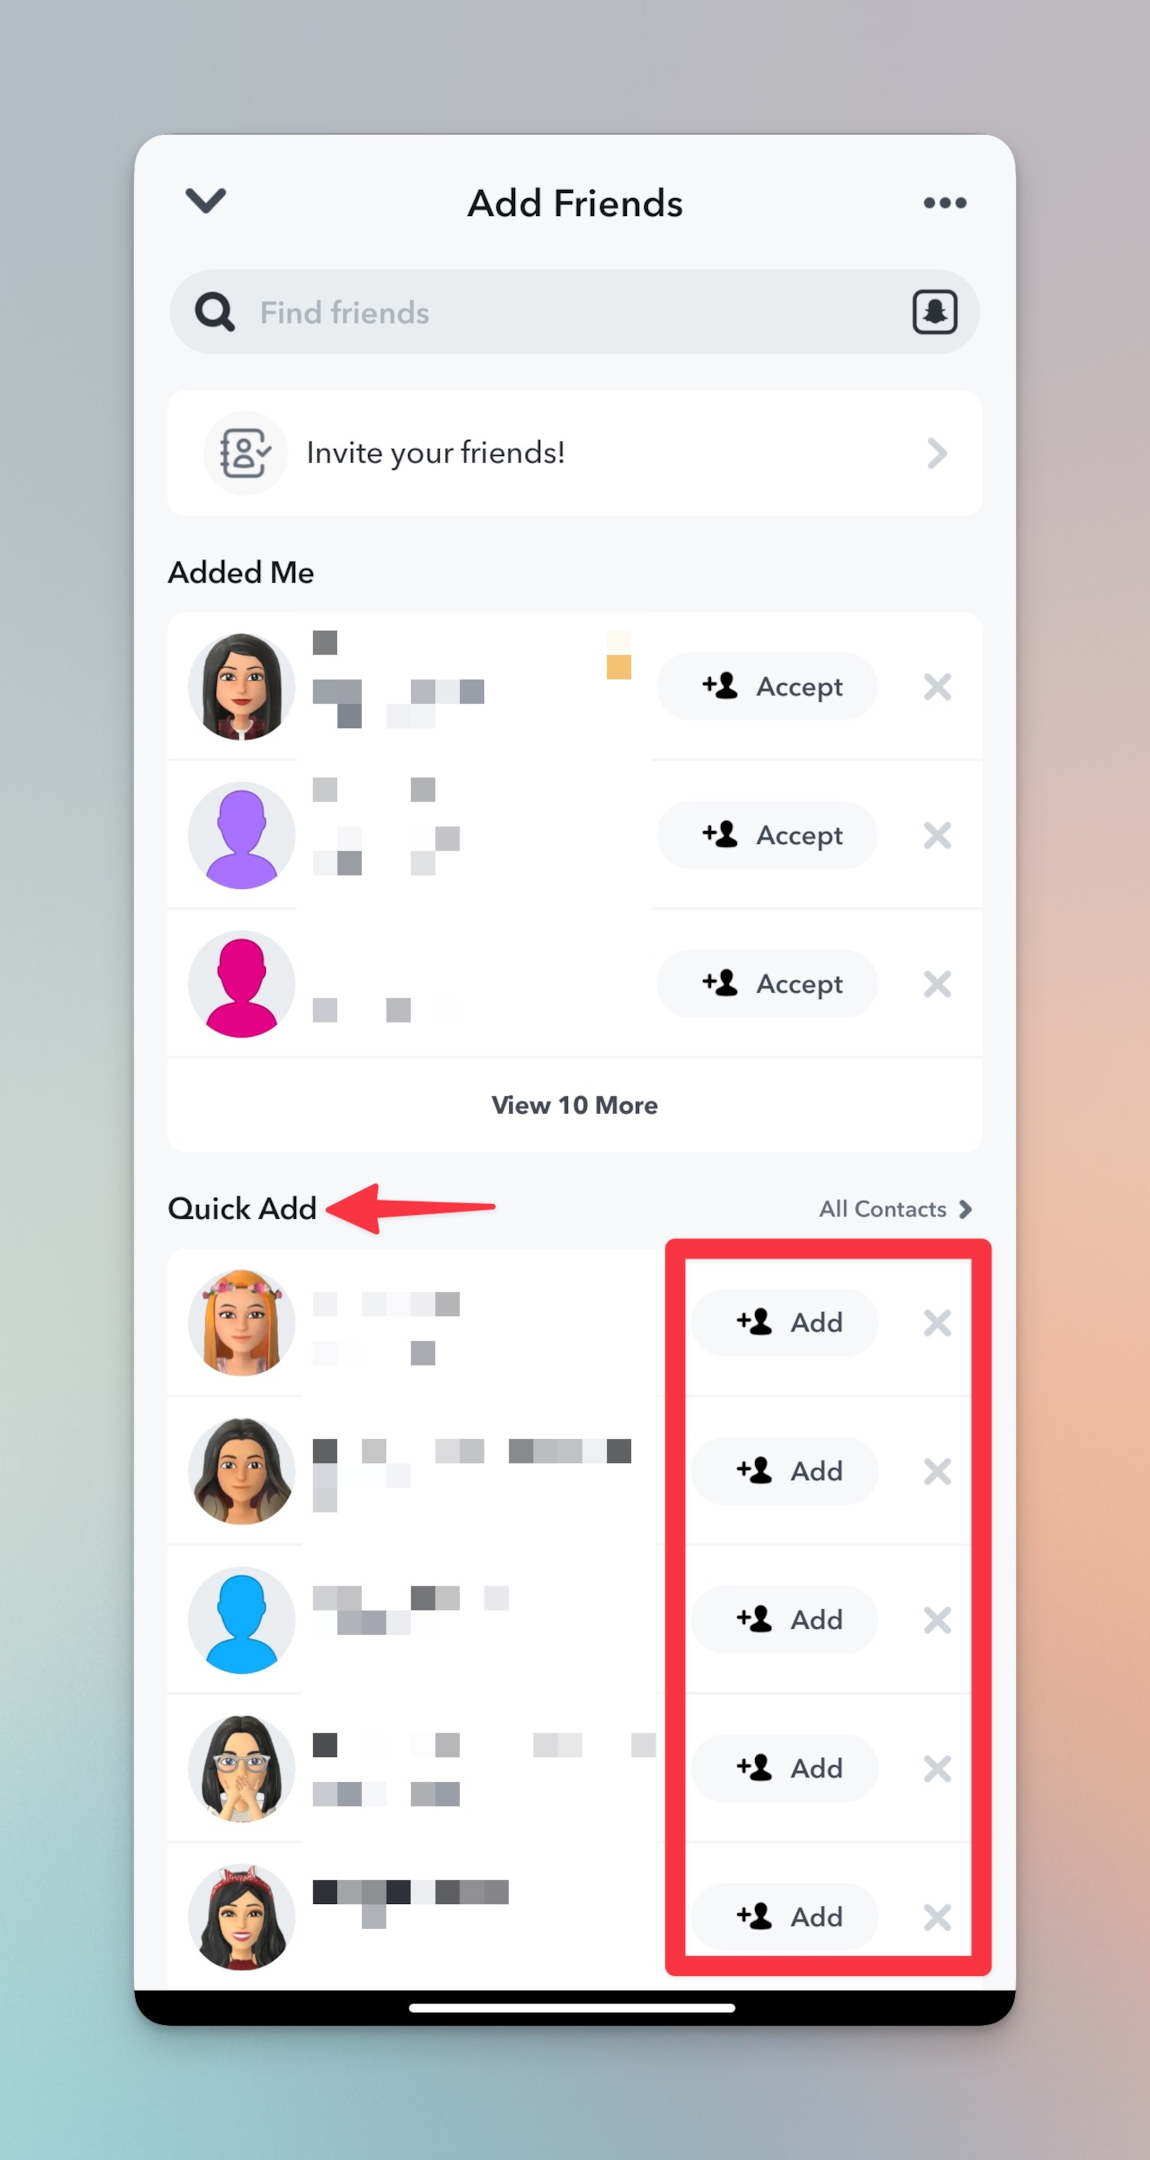 Remote.tools shows how to add friends from Quick add section